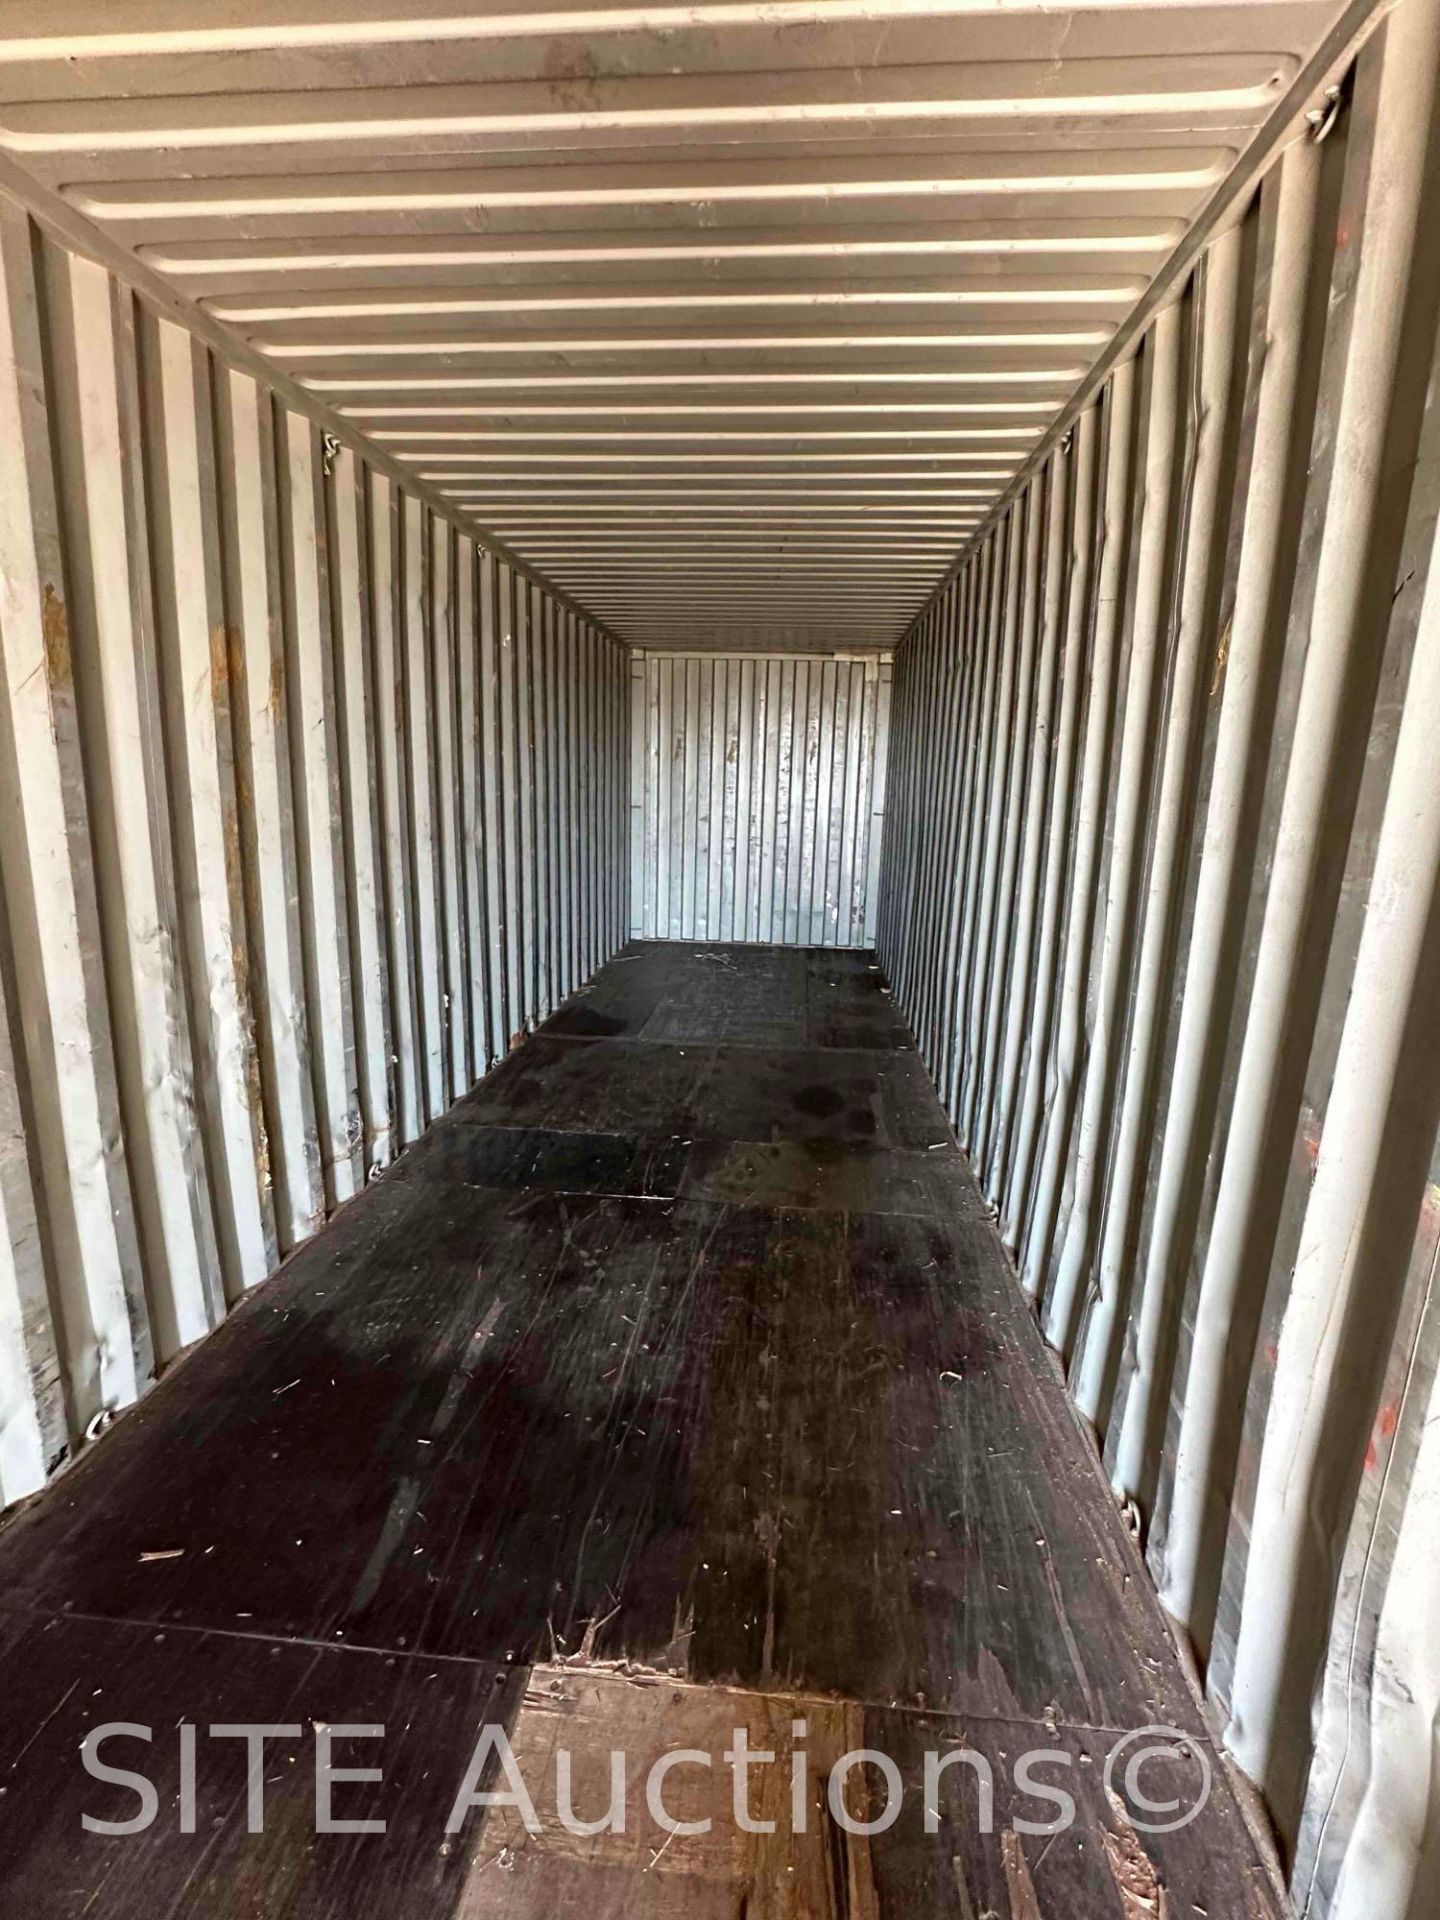 APL 40ft. Shipping Container - Image 9 of 9